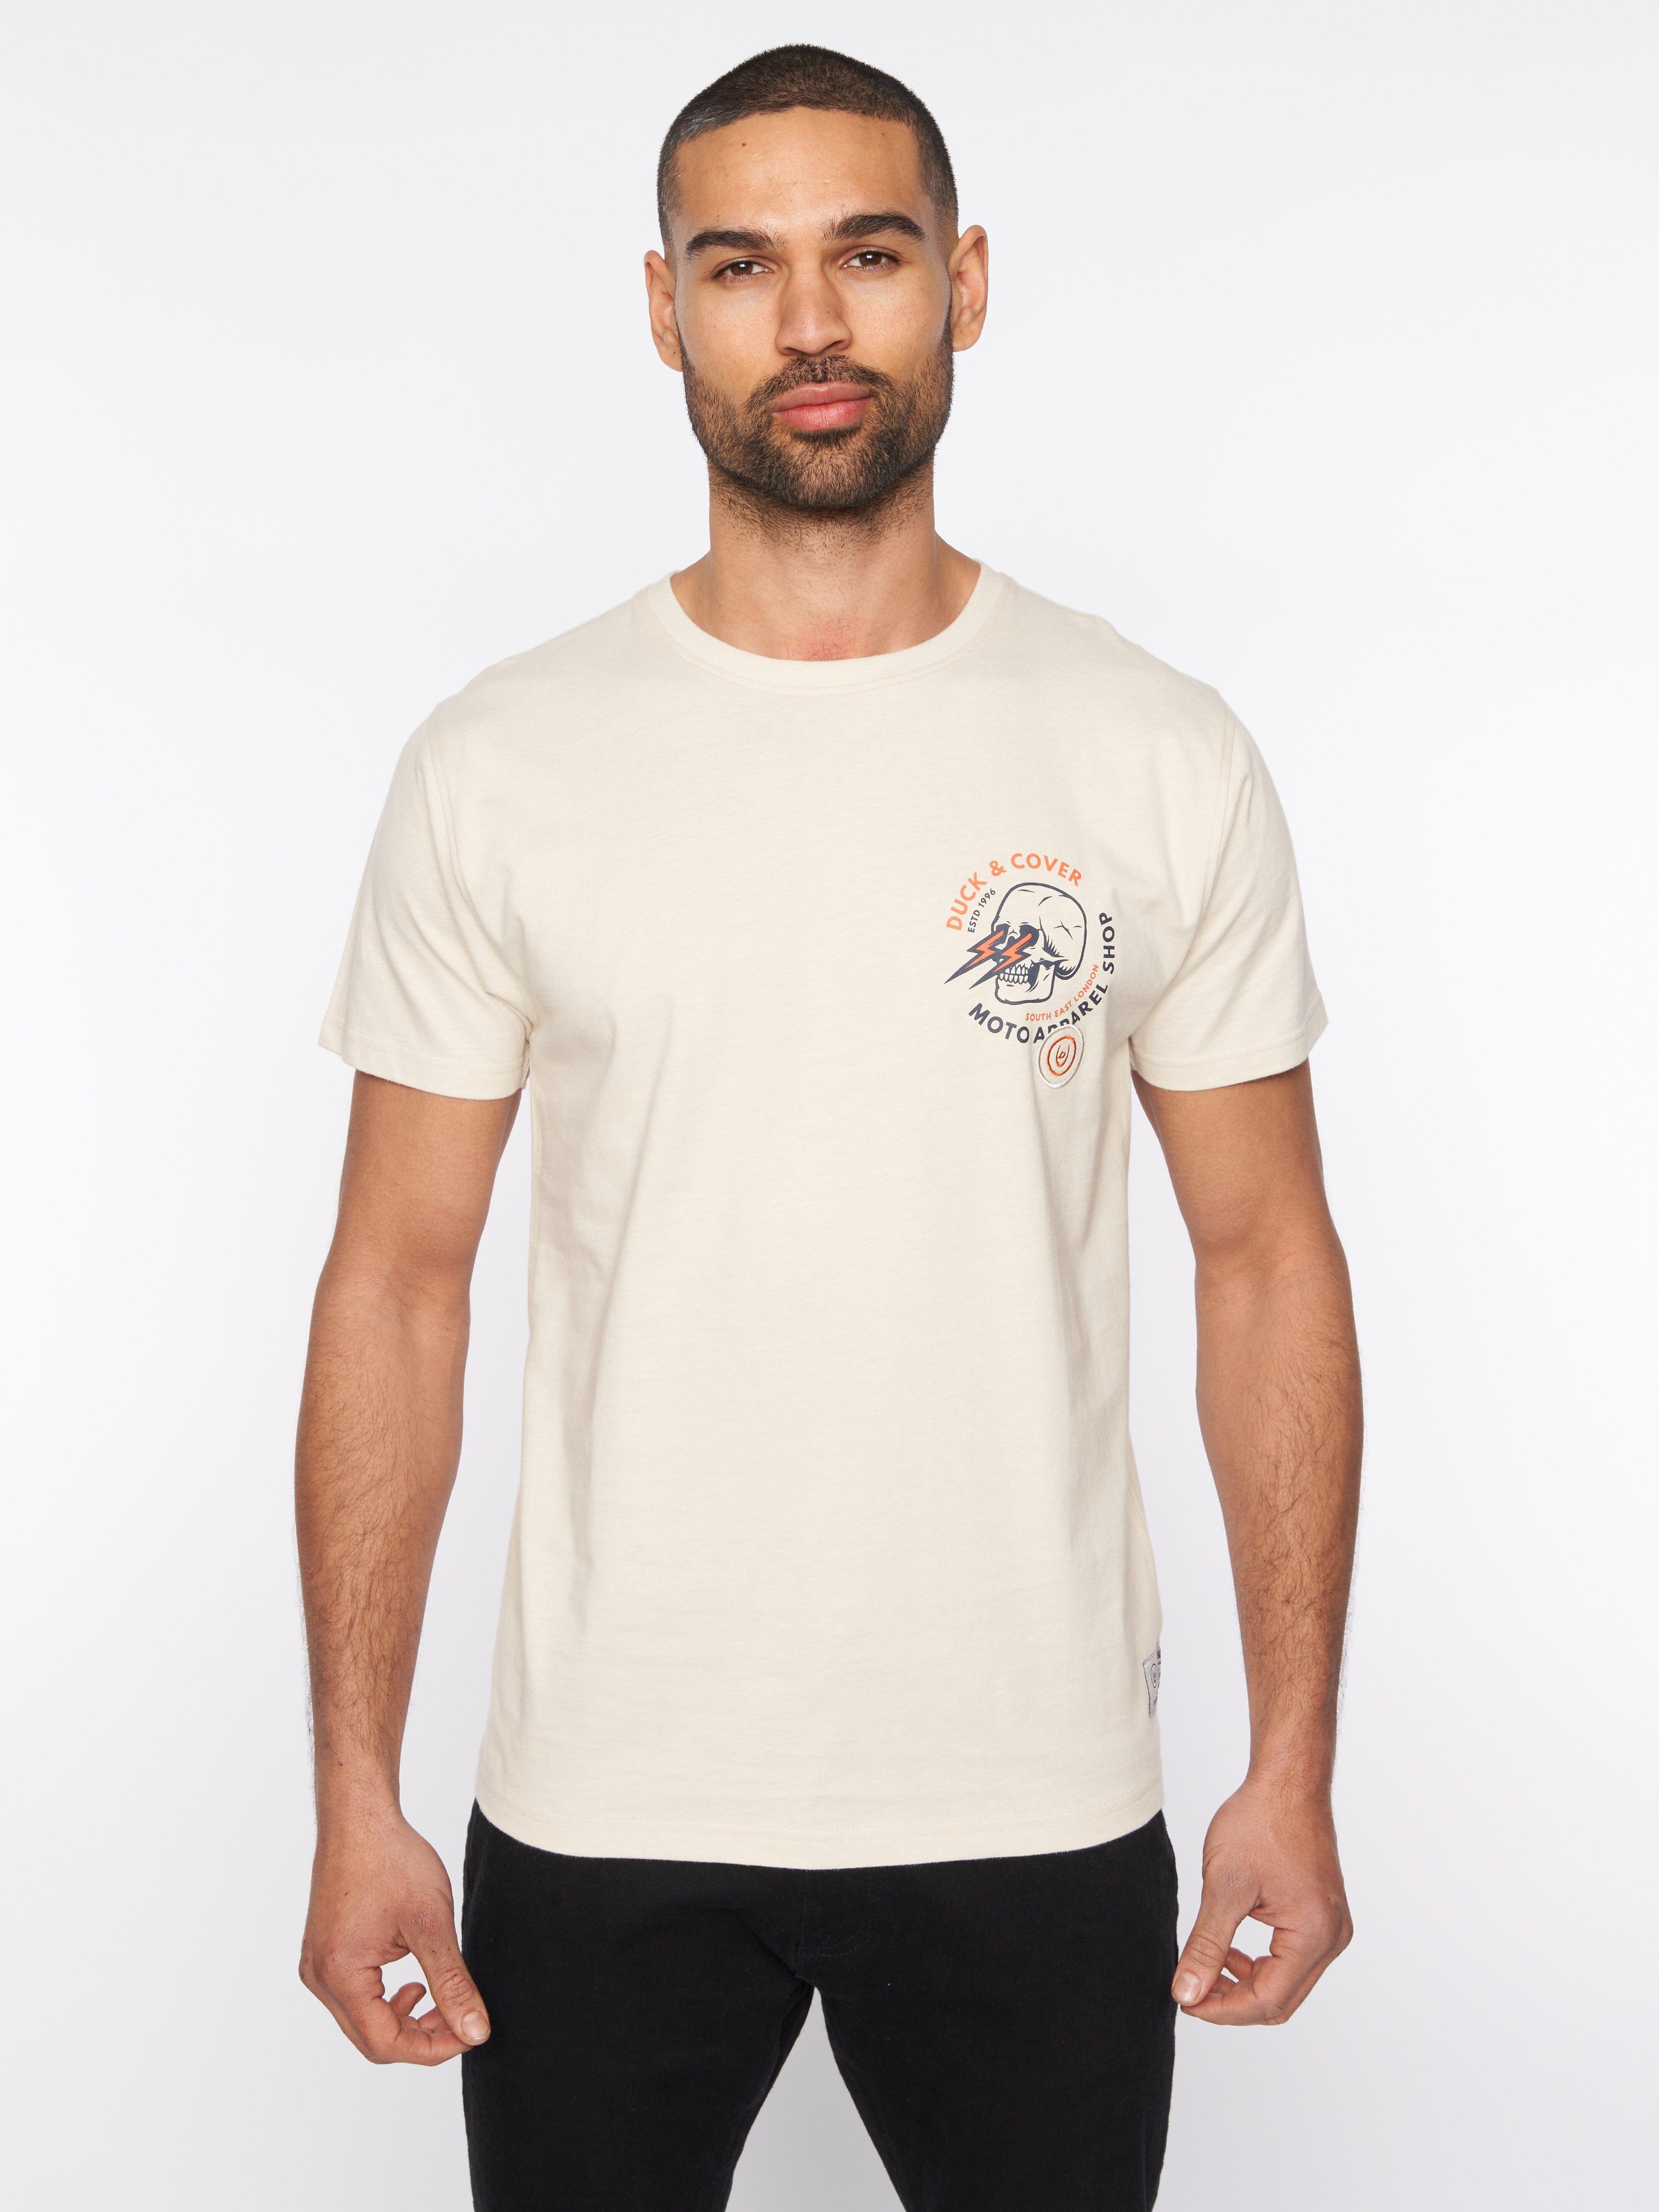 Duck And Cover Blevins T-Shirt Mens - BTM-3030